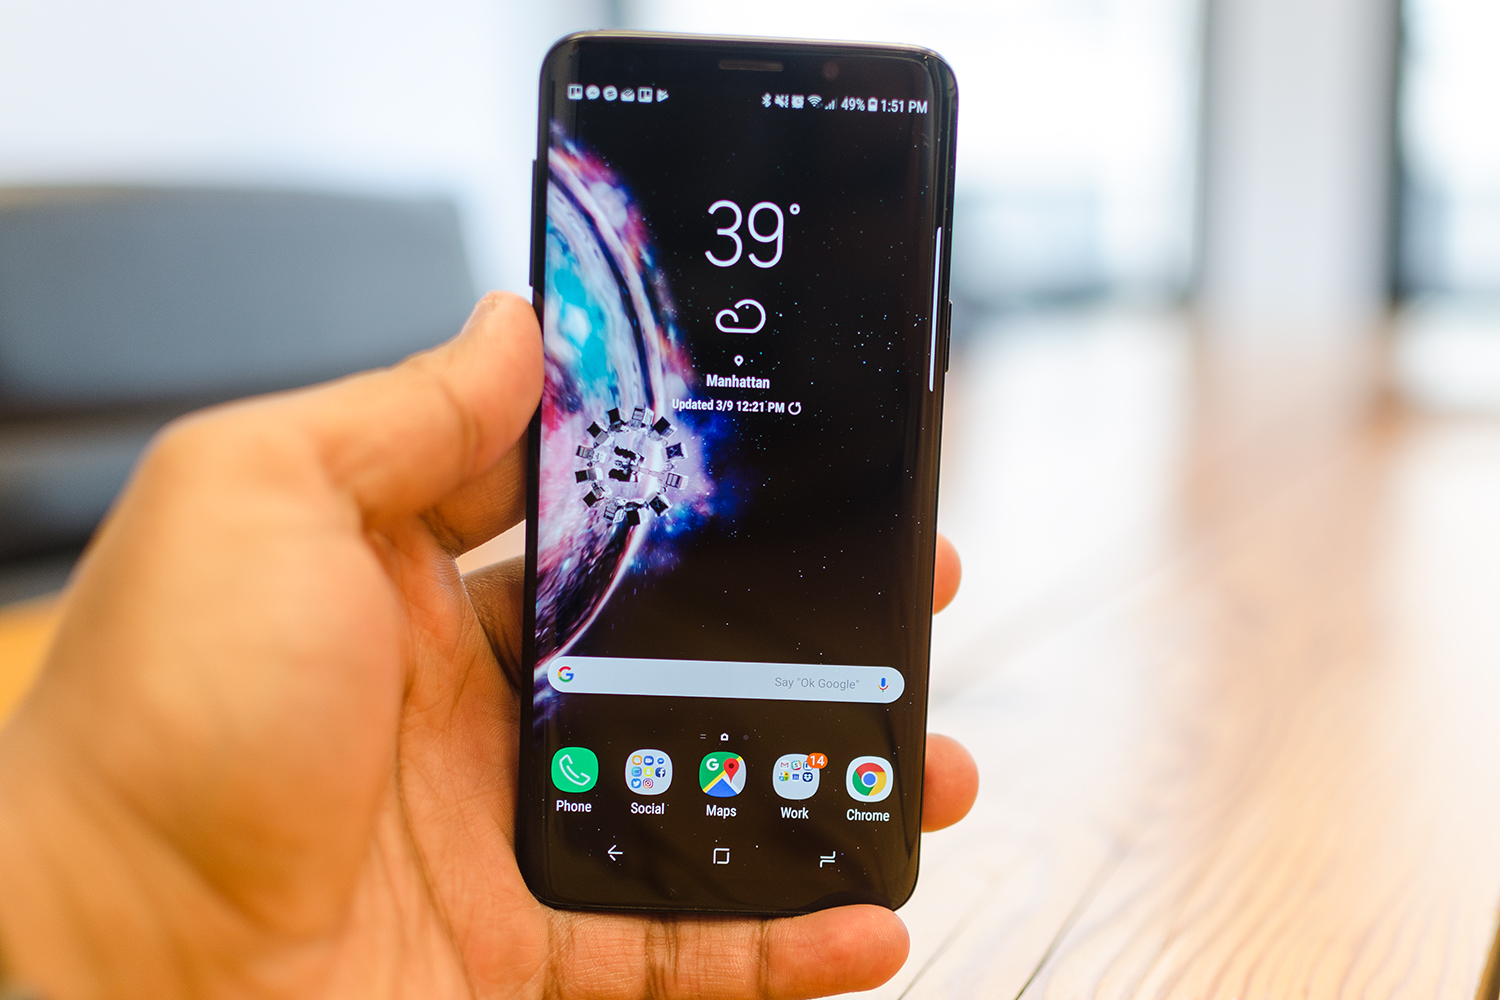 Samsung Galaxy S9 review: Not to be forgotten